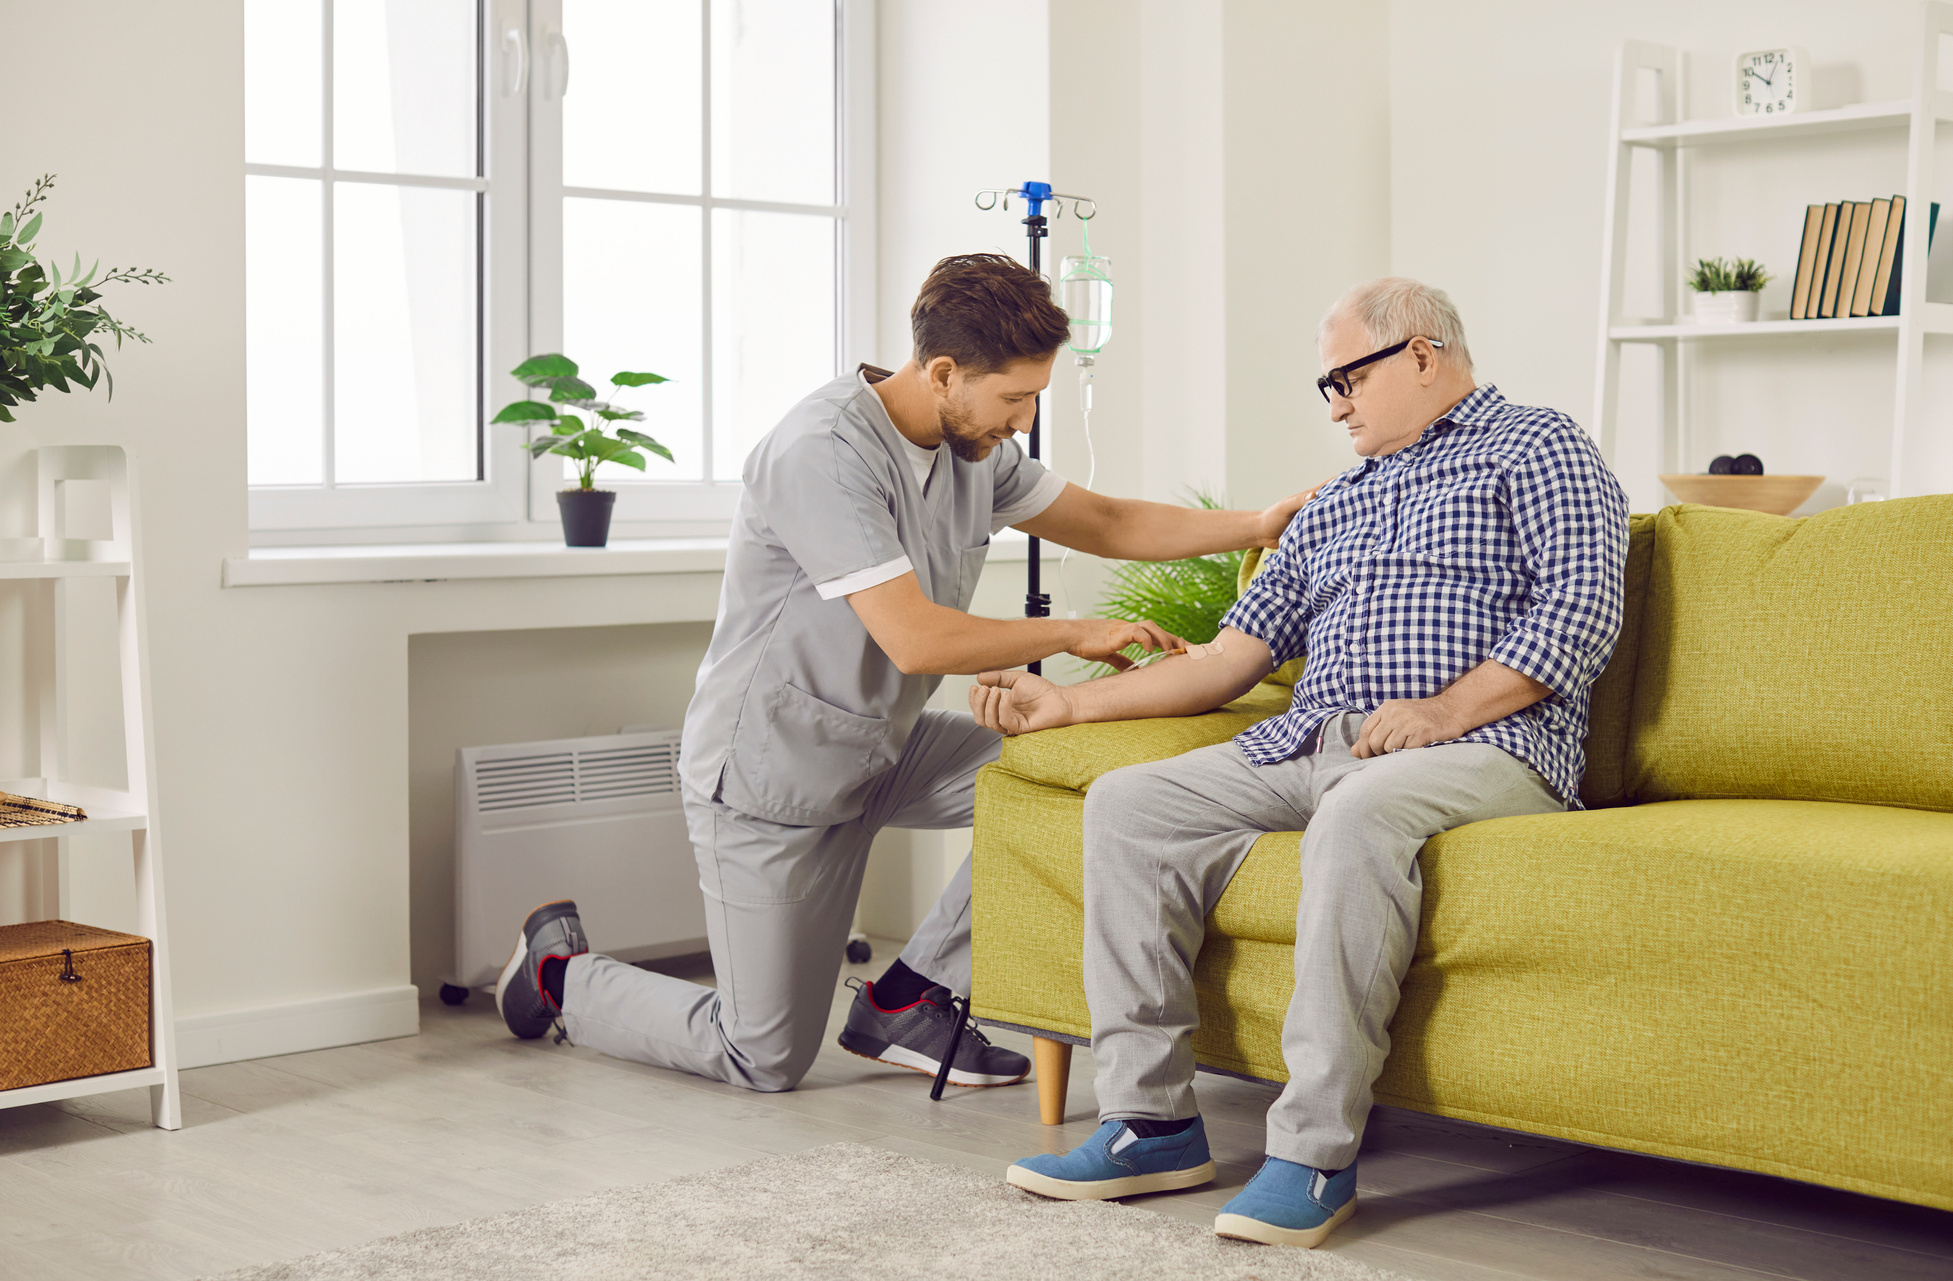 Male Caregiver Setting up Iv Drip to Senior Patient